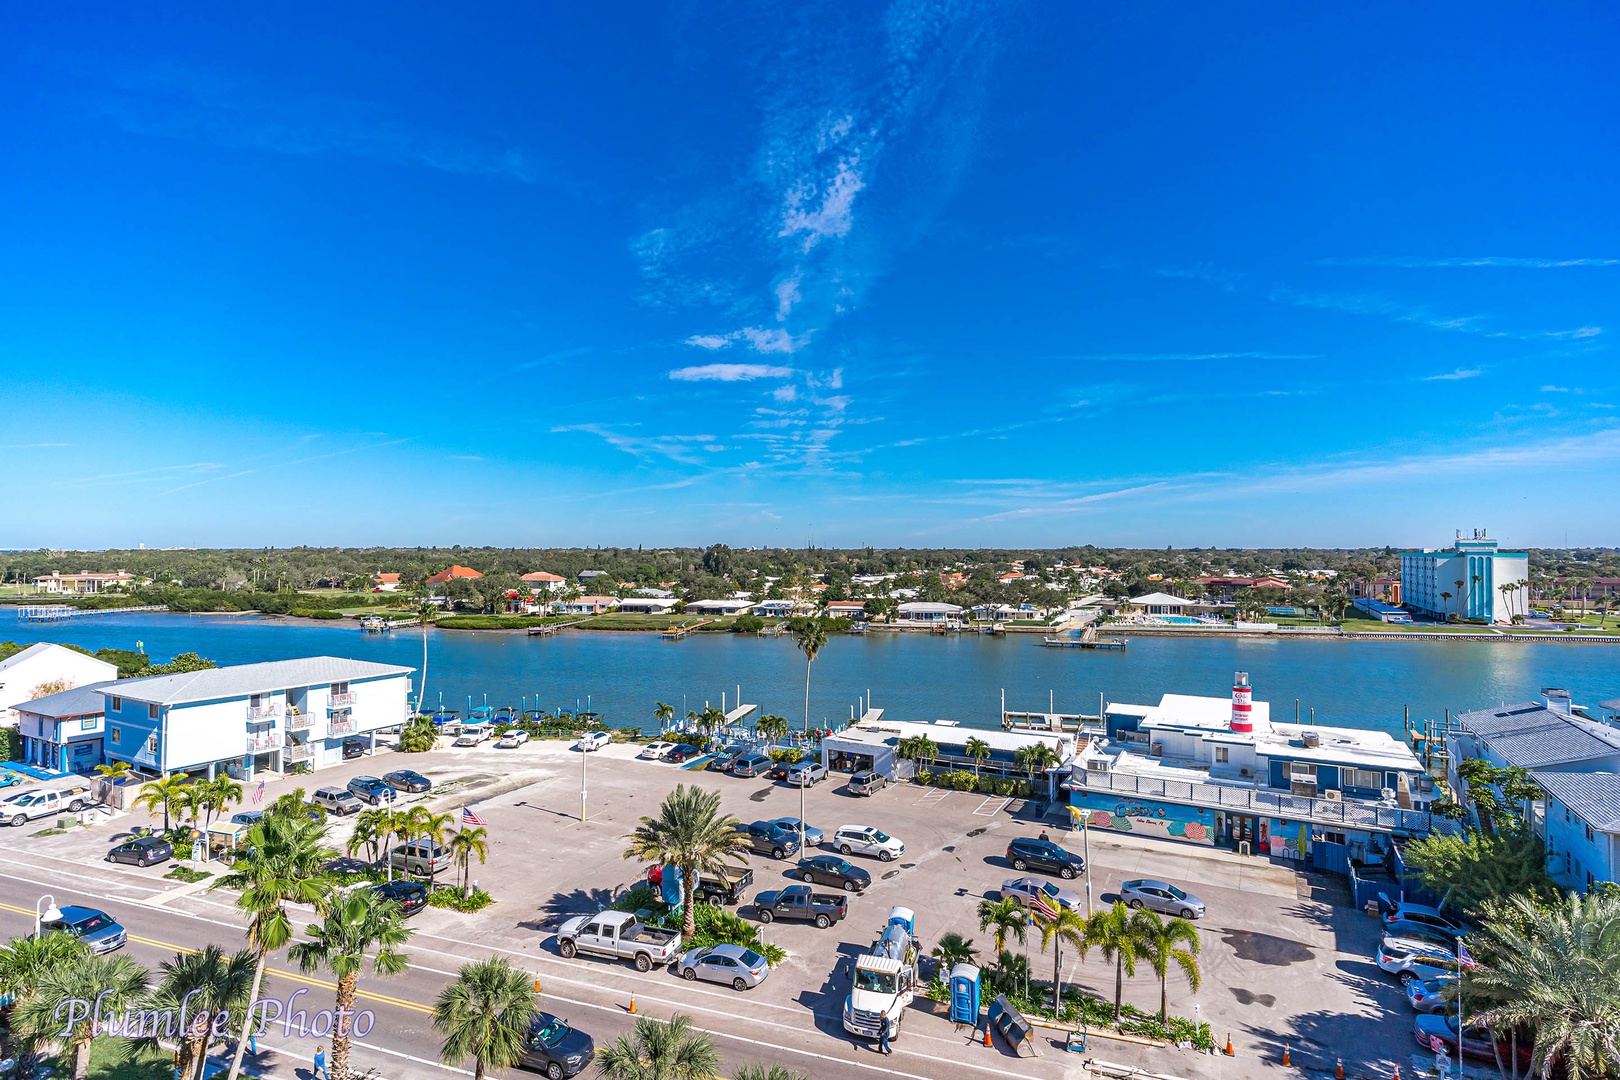 Watch the boats cruising on the Intracoastal Waterway from the 2nd/3rd bedrooms